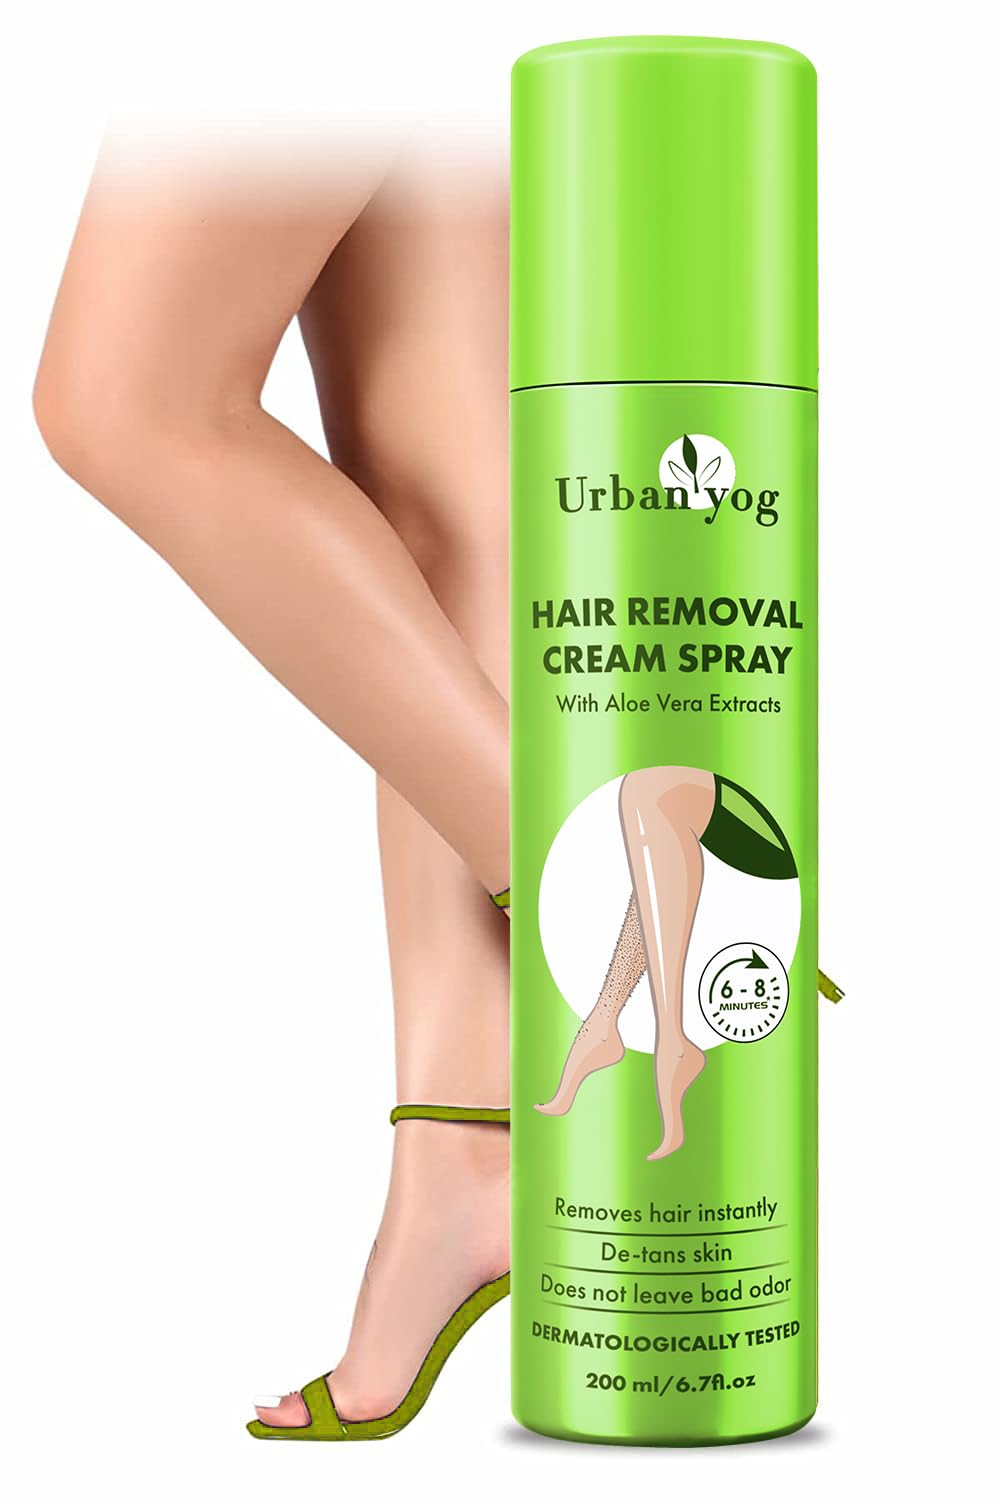 Urban Yog Hair Removal Cream Spray With Aloe Vera Extracts | Pain-free Body Hair Removal for Women (200 ml)